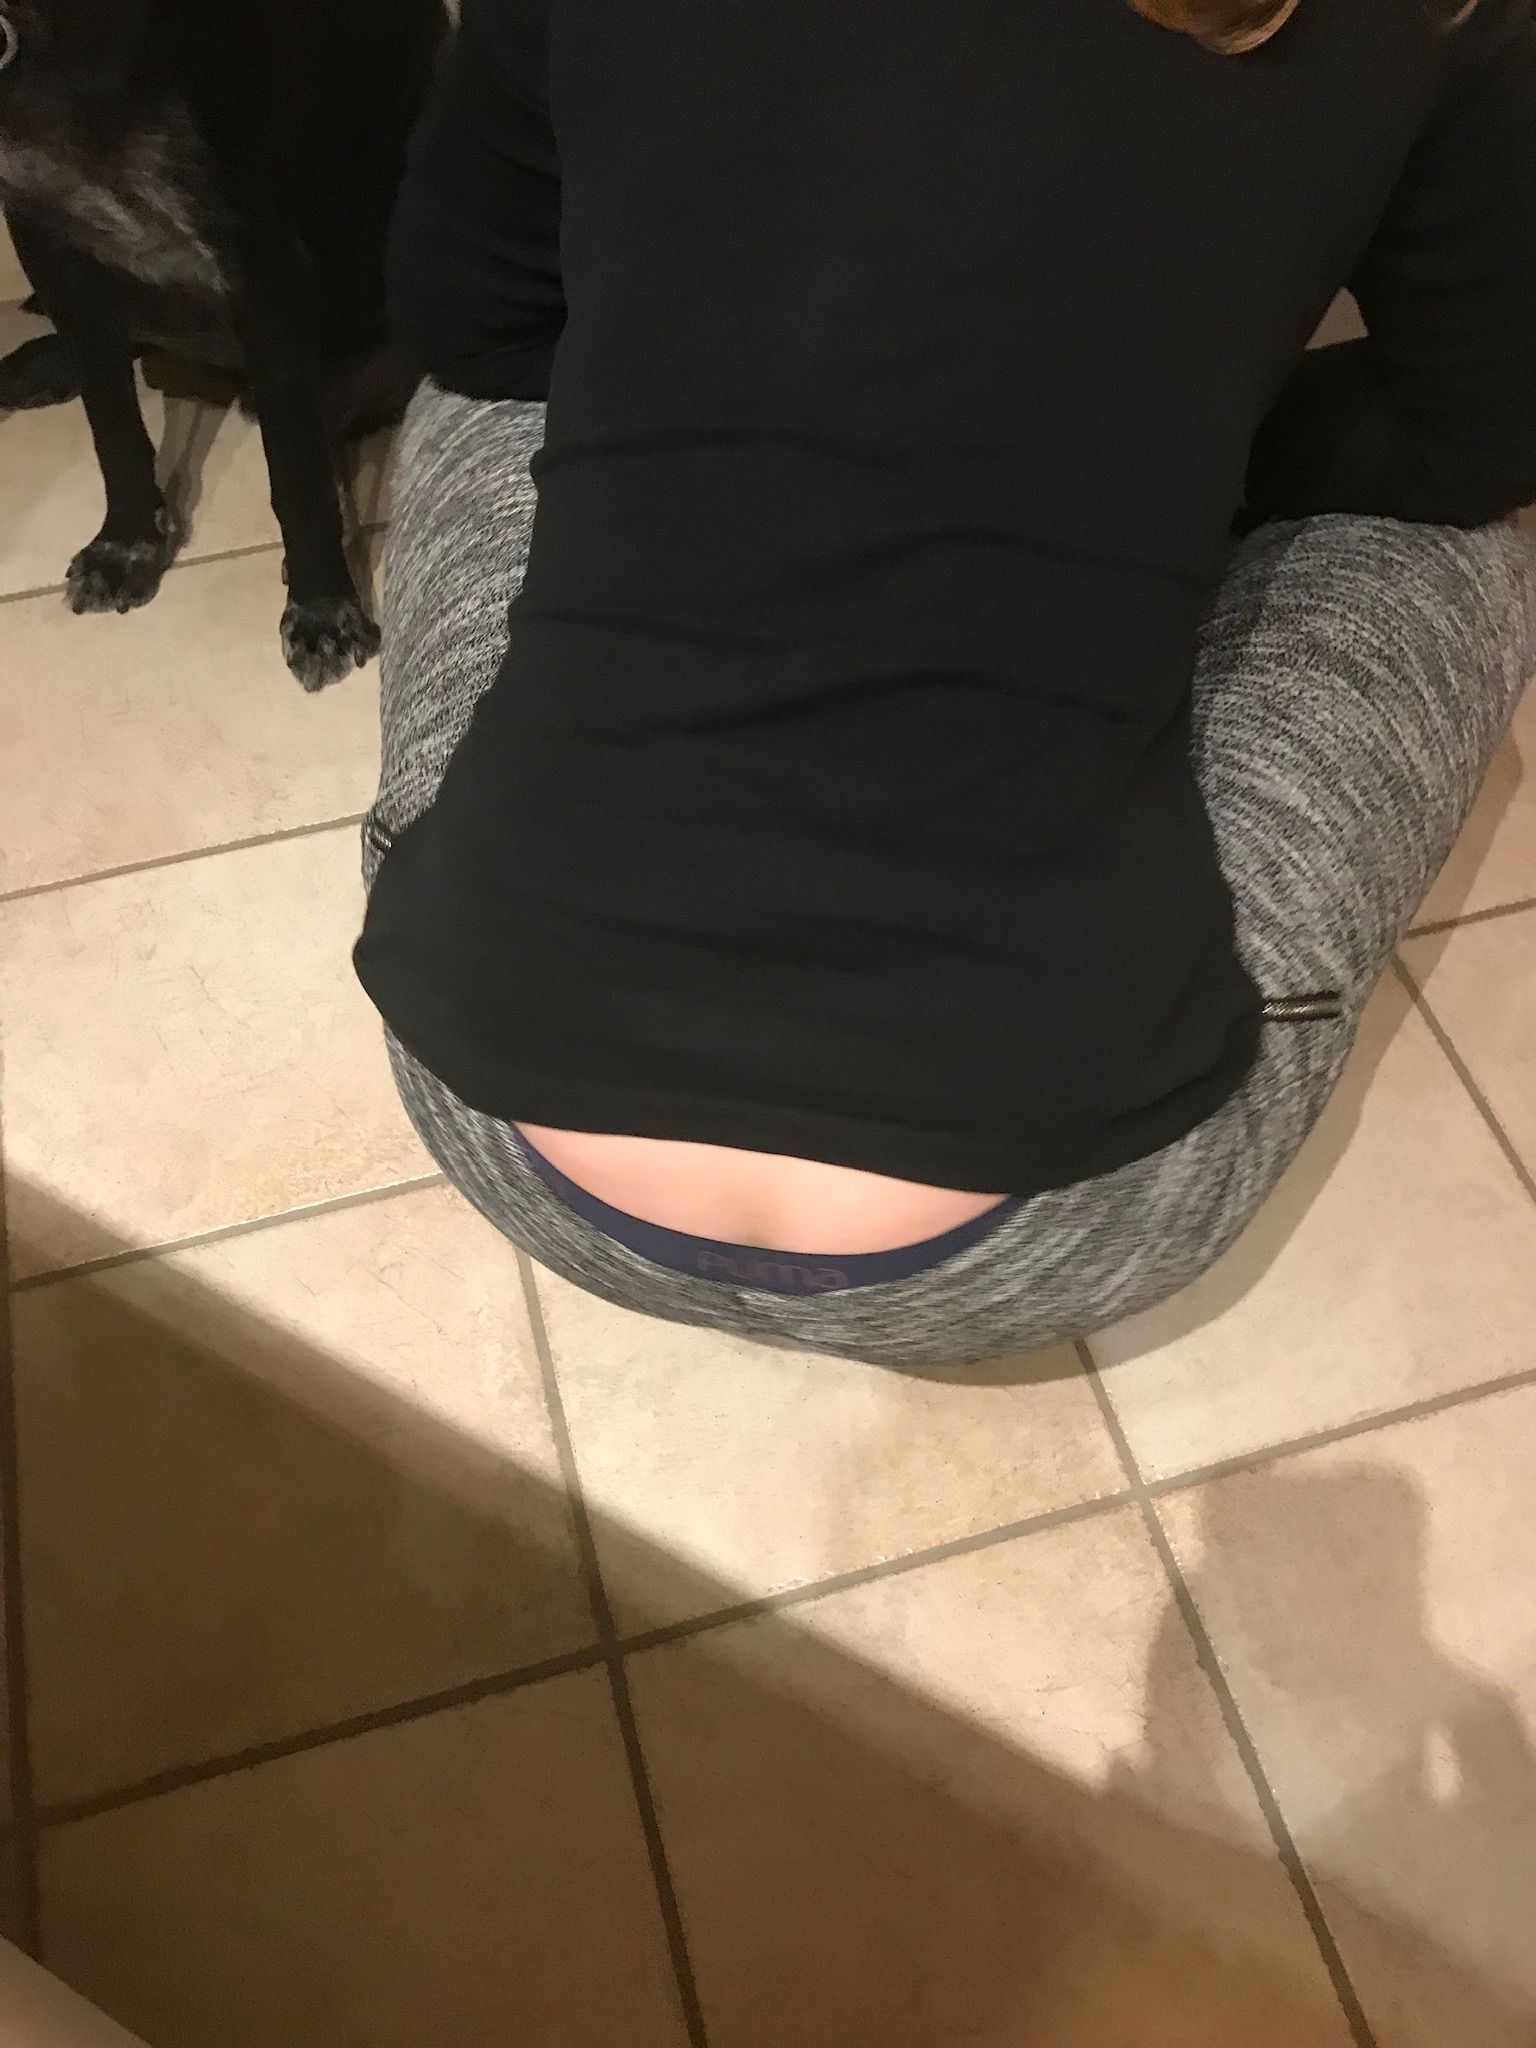 Wife from behind! Butt crack